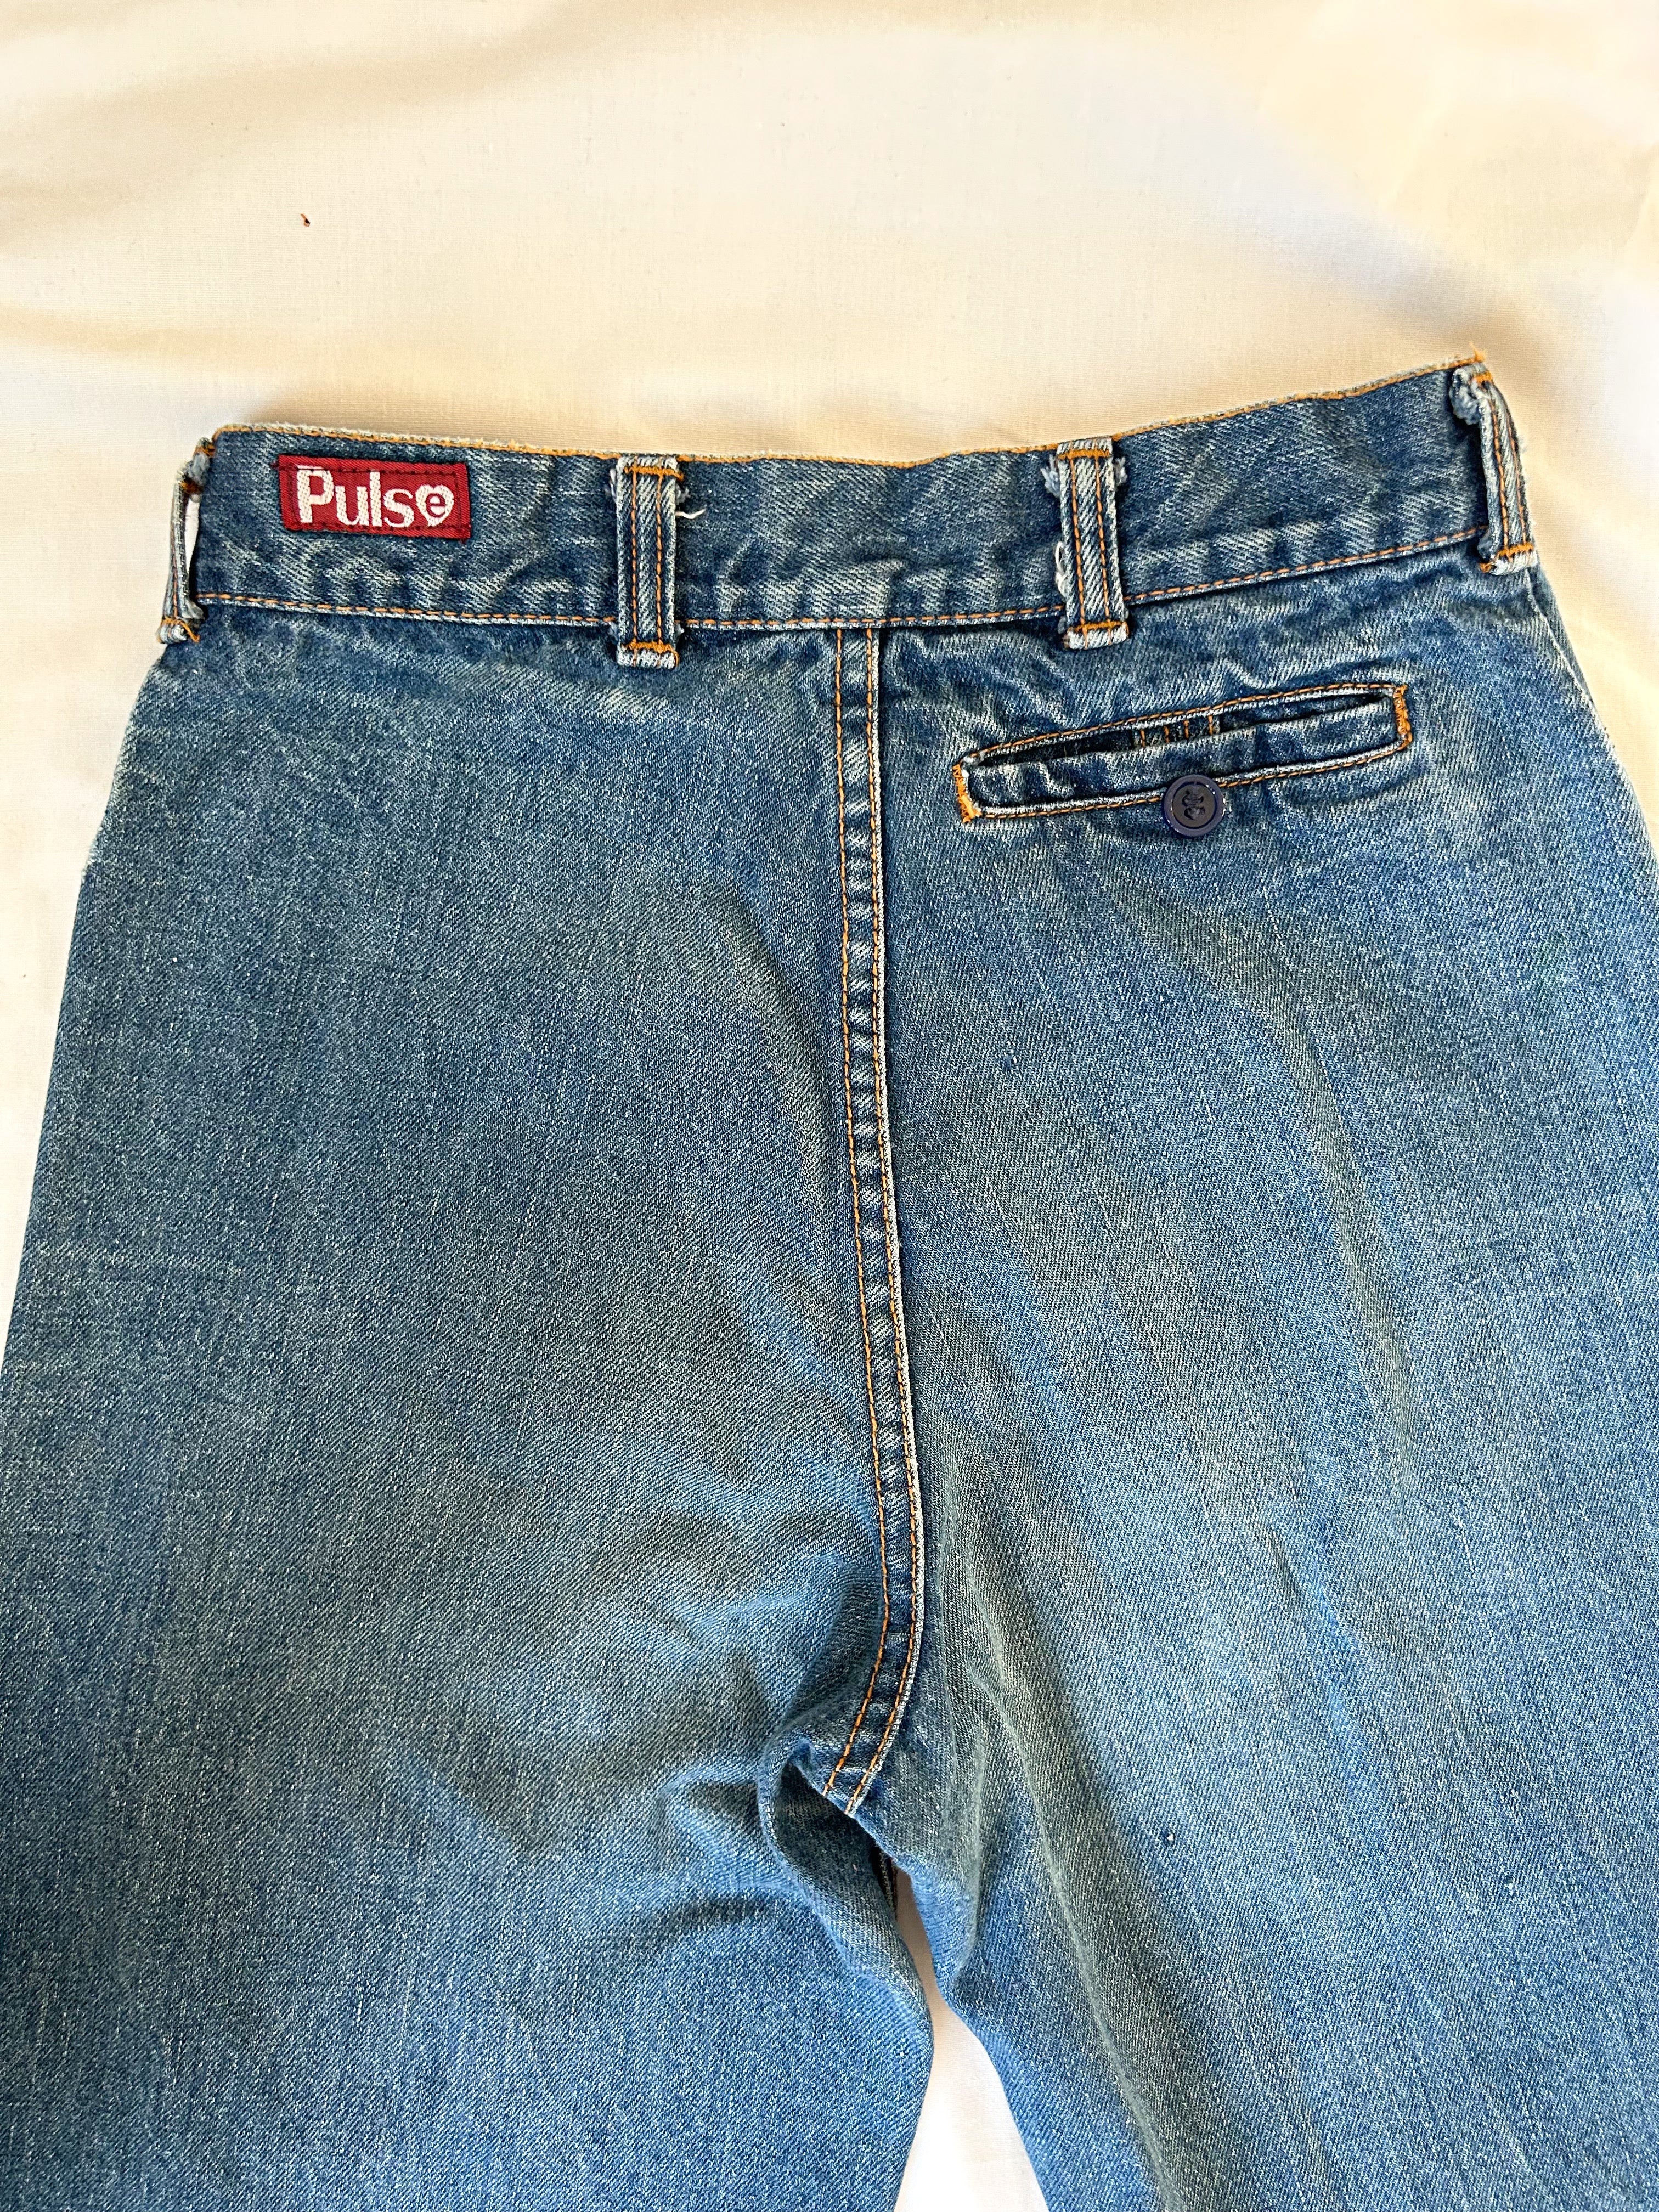 70s Vintage Distressed Jeans, High Rise 26” Waist, Wide Straight Leg, Made in Canada